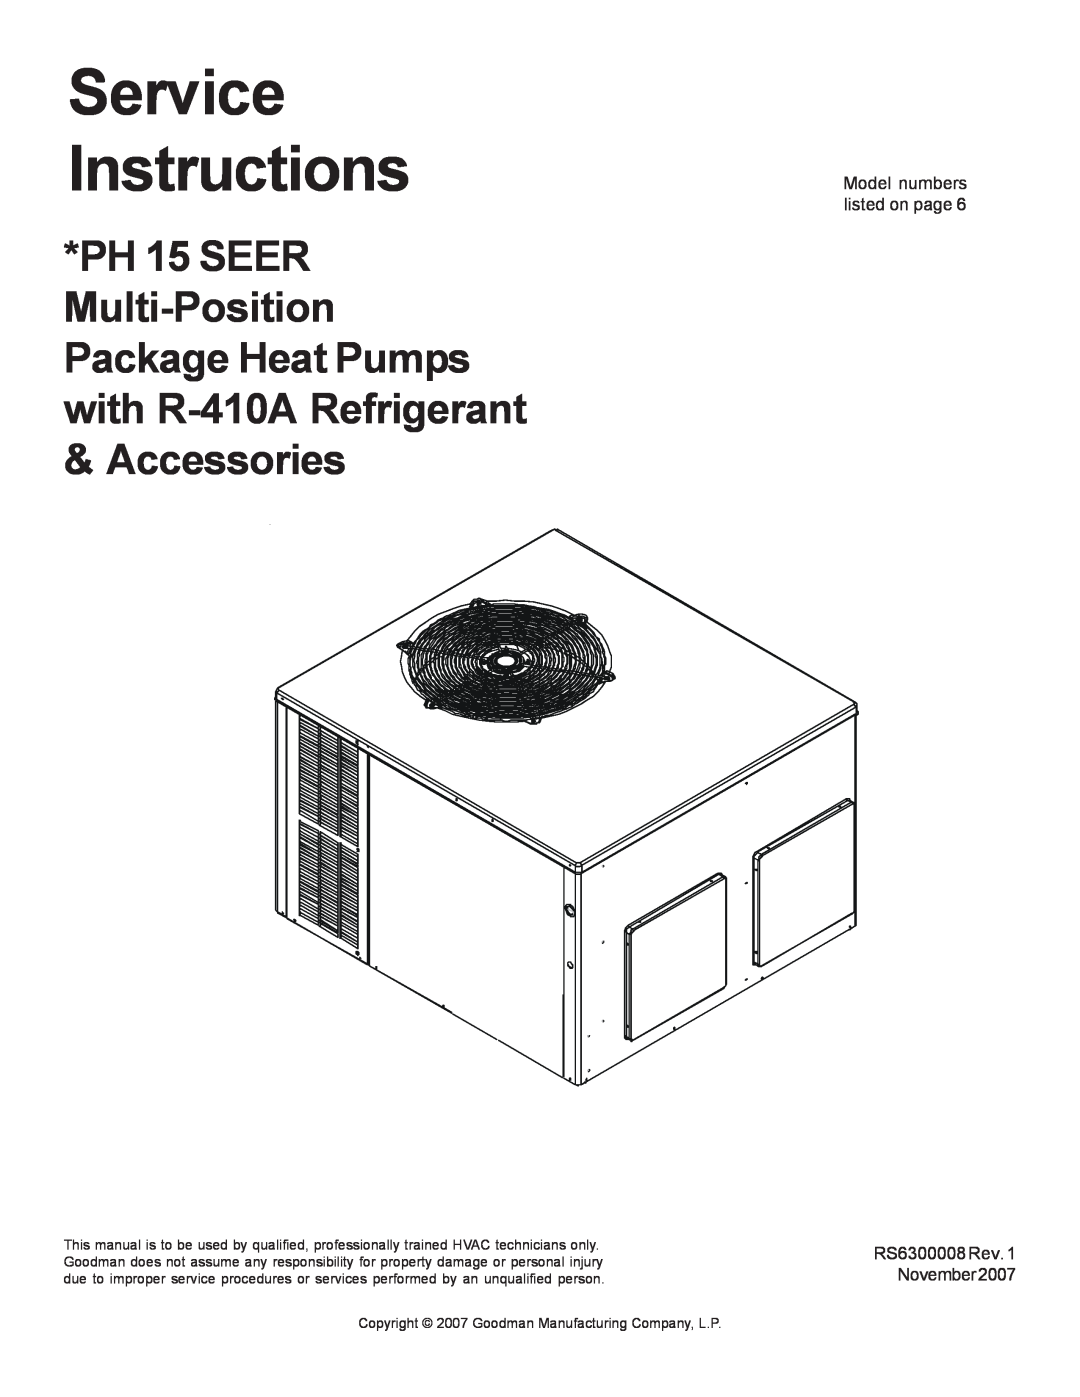 Goodman Mfg service manual Technical Manual, GPC 14 SEER R-410A Package Air Conditioners with R-410A 